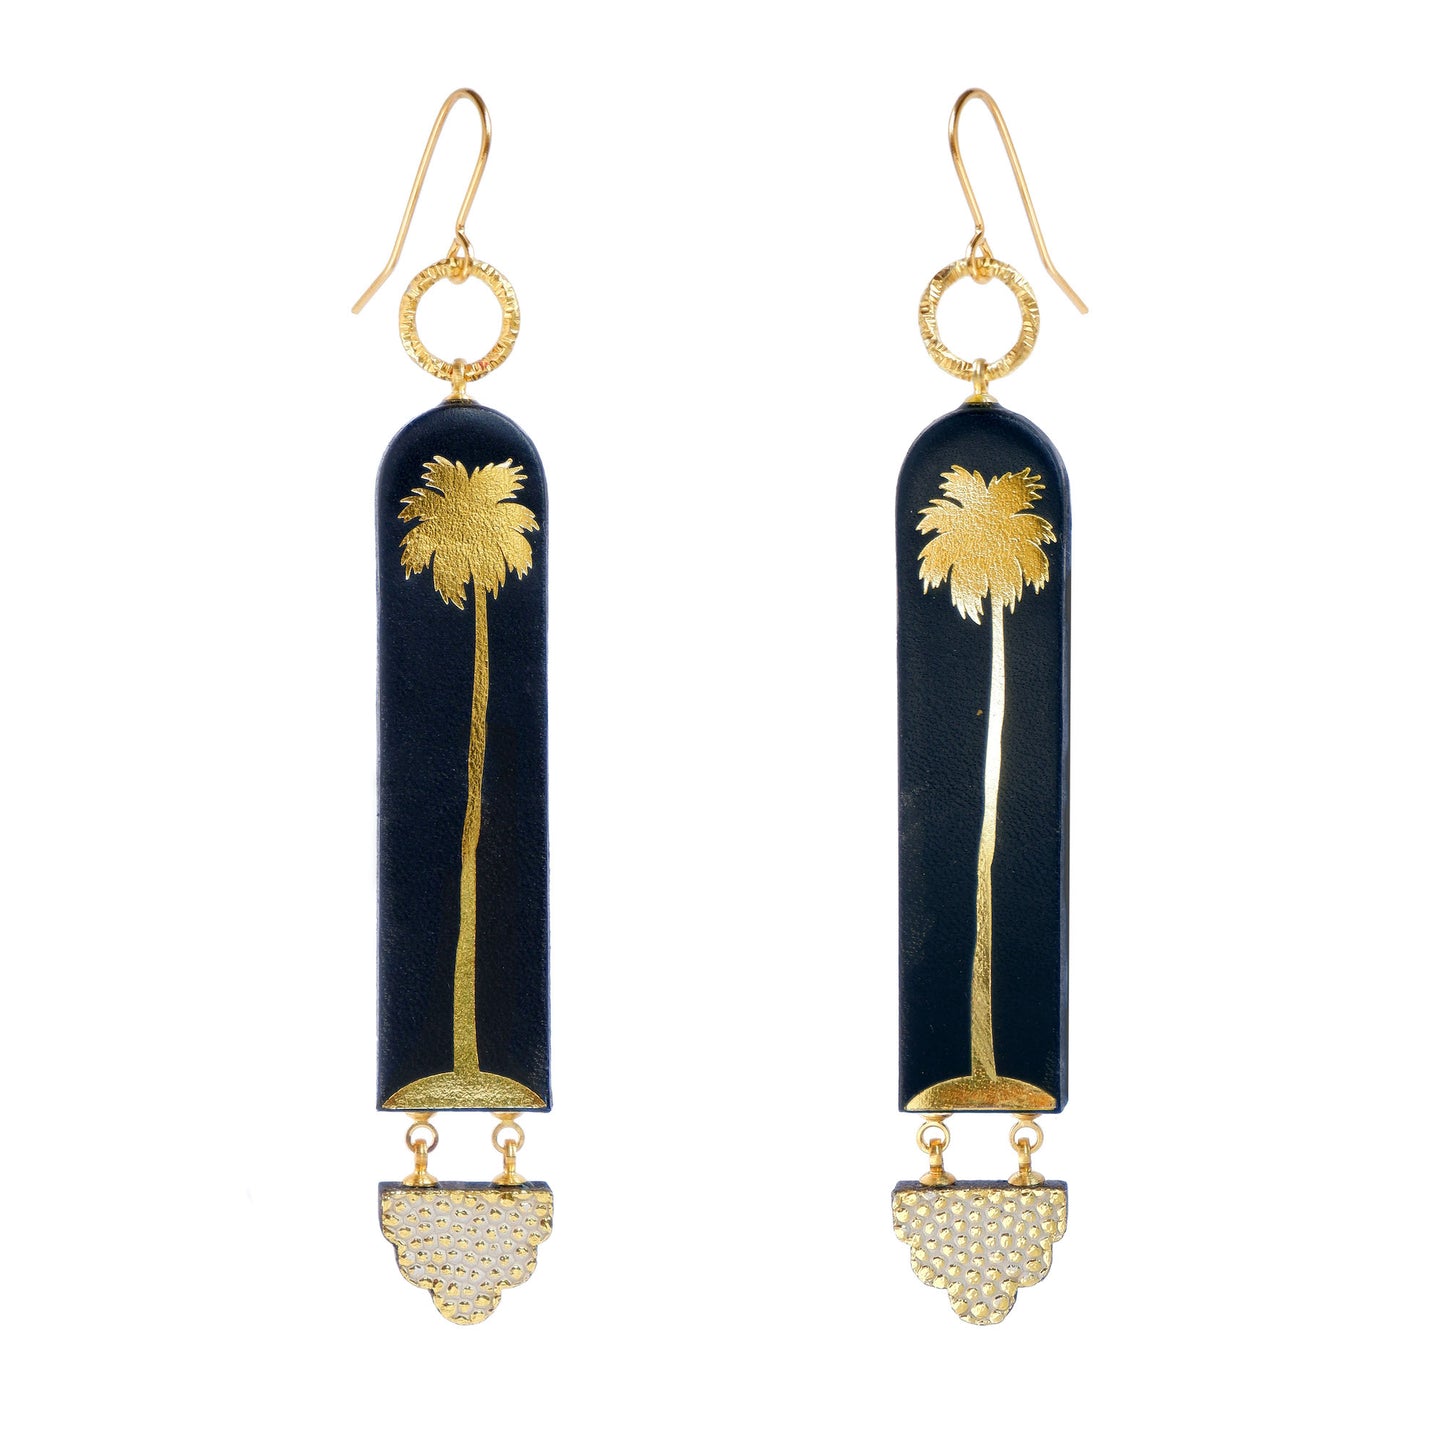 long drop hook earrings - arched strips in black leather, printed with gold palm trees